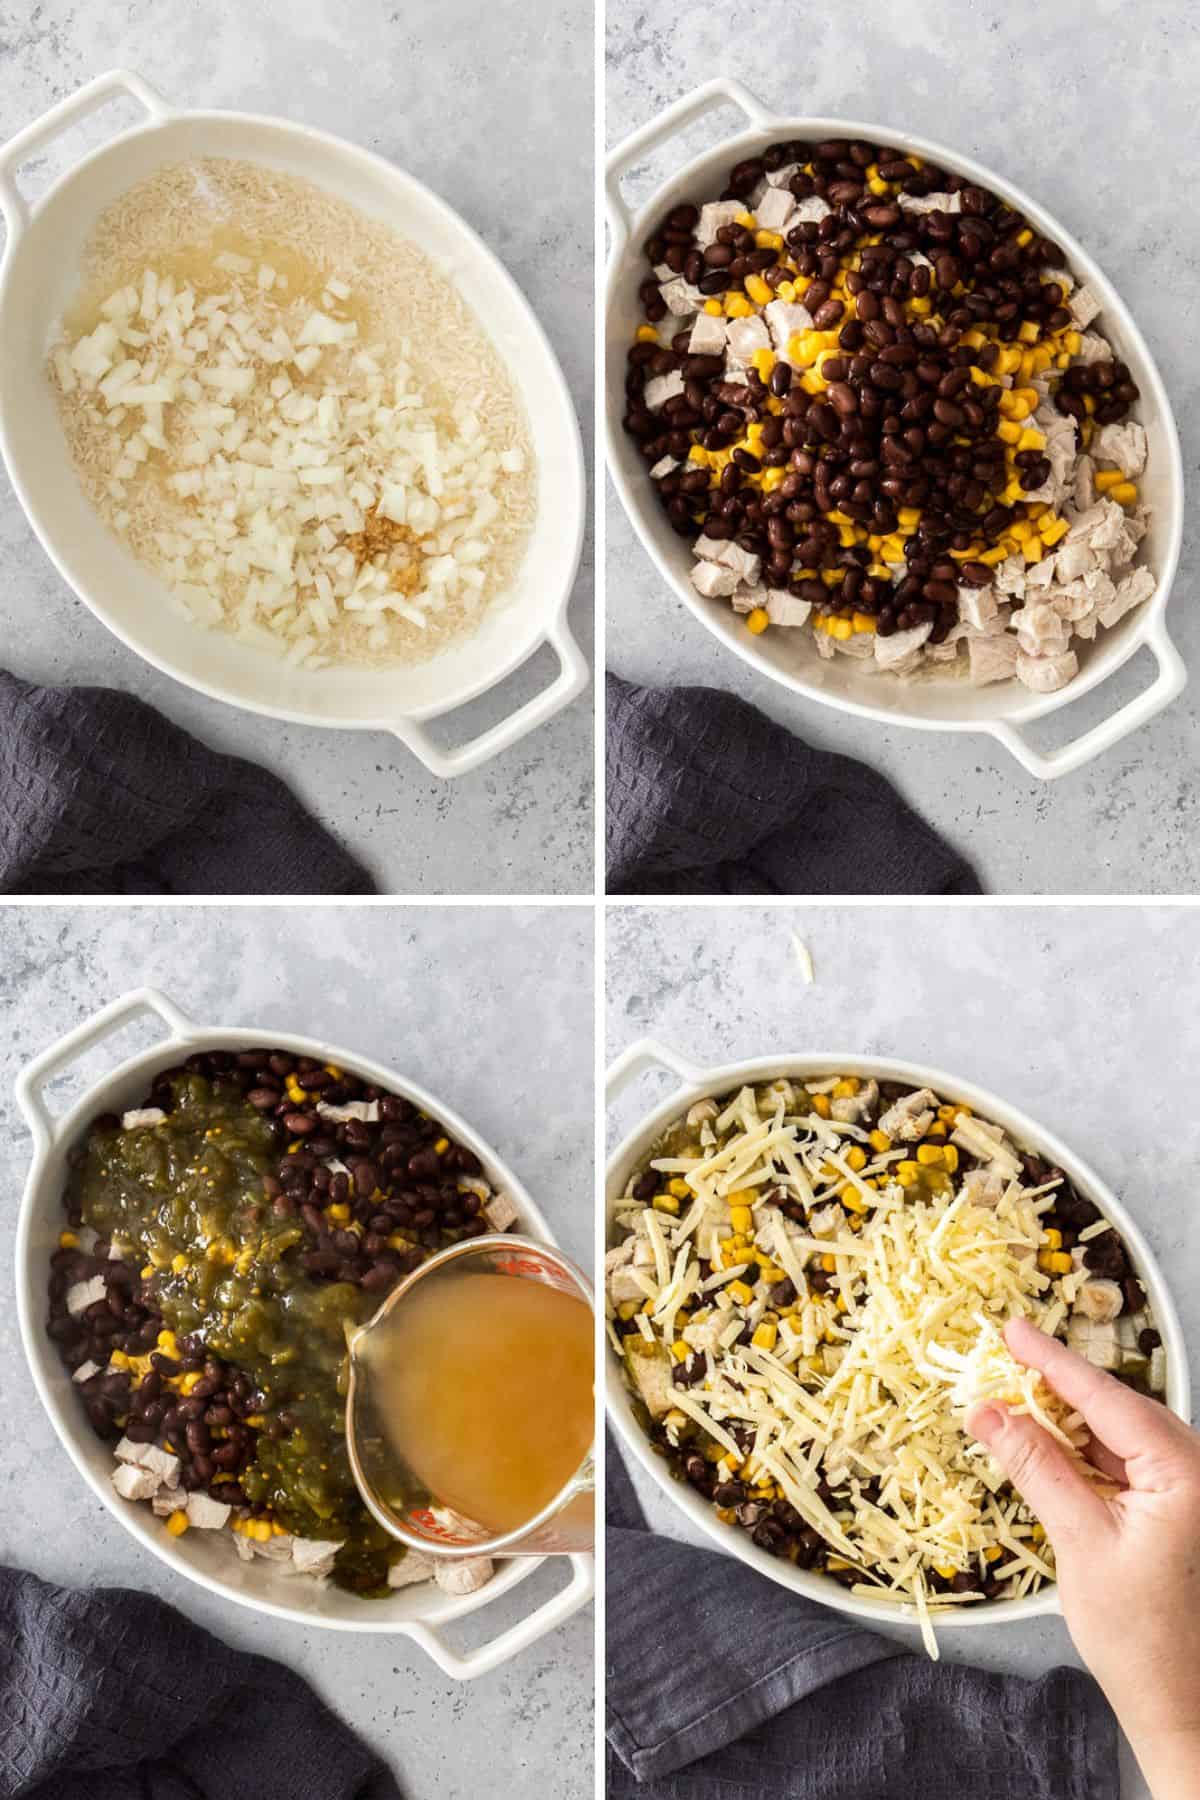 4 photos showing the process of making turkey casserole.